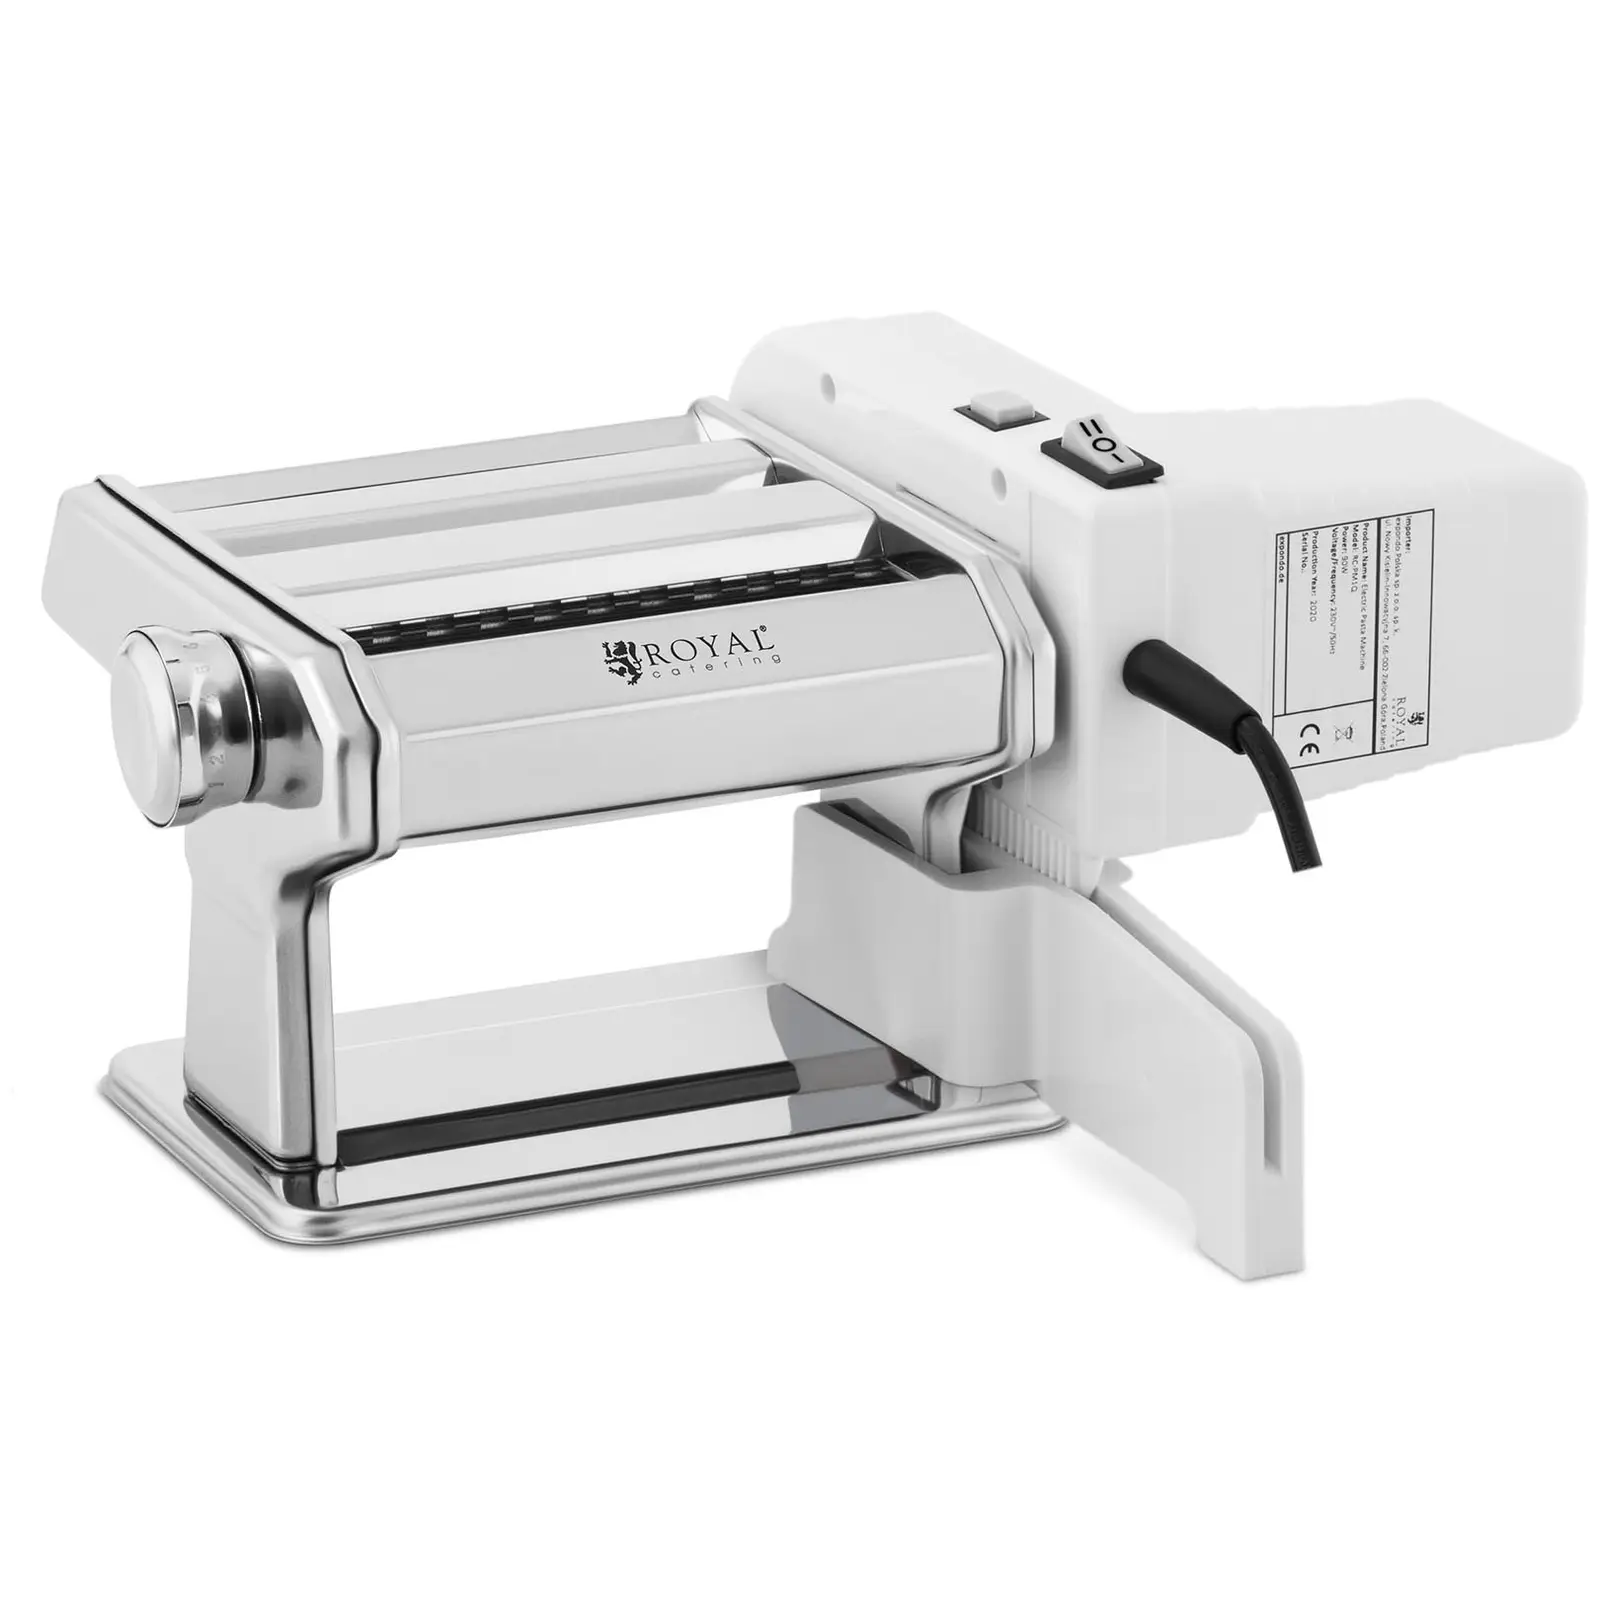 Pasta Machine - 14 cm - 0.5 to 3 mm - manual or electric